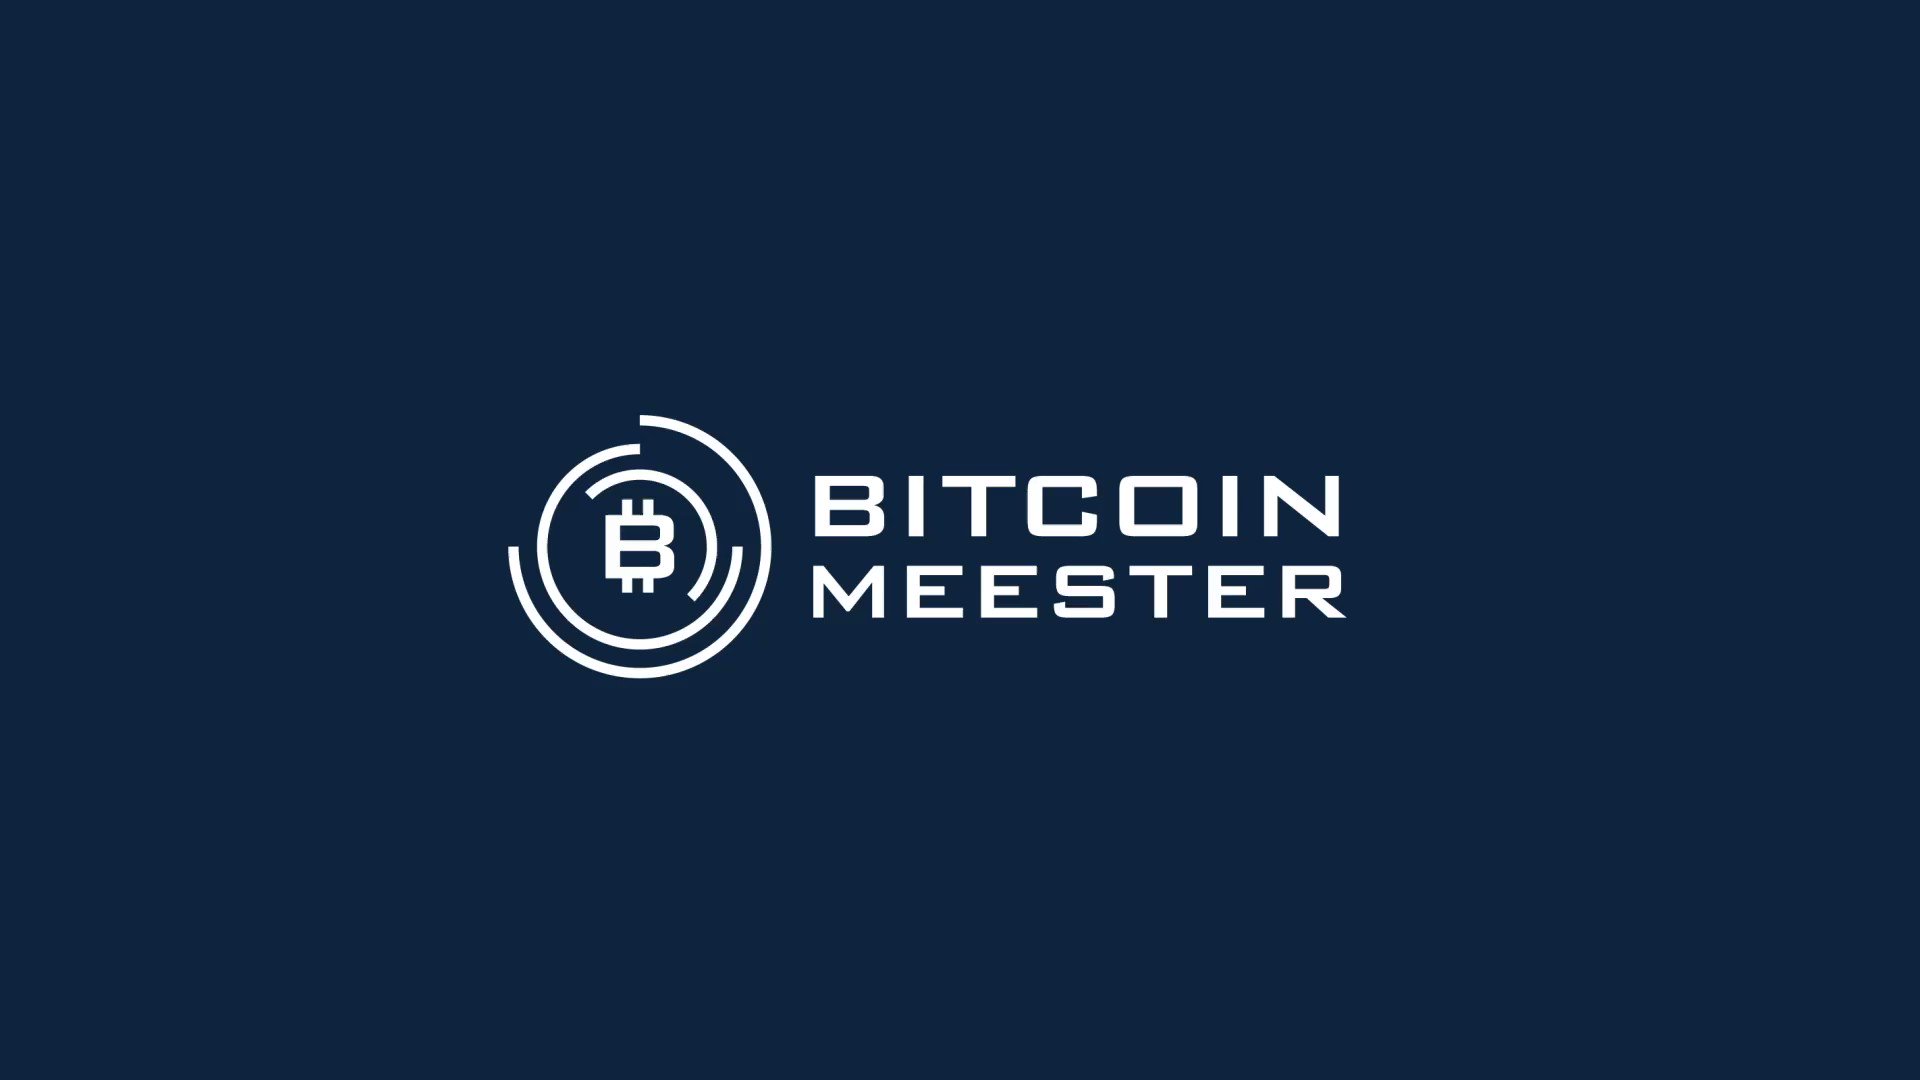 Bitcoin past, present, & future: Anders interviews Adam Meister about price, hyperbitcoinization, much more!